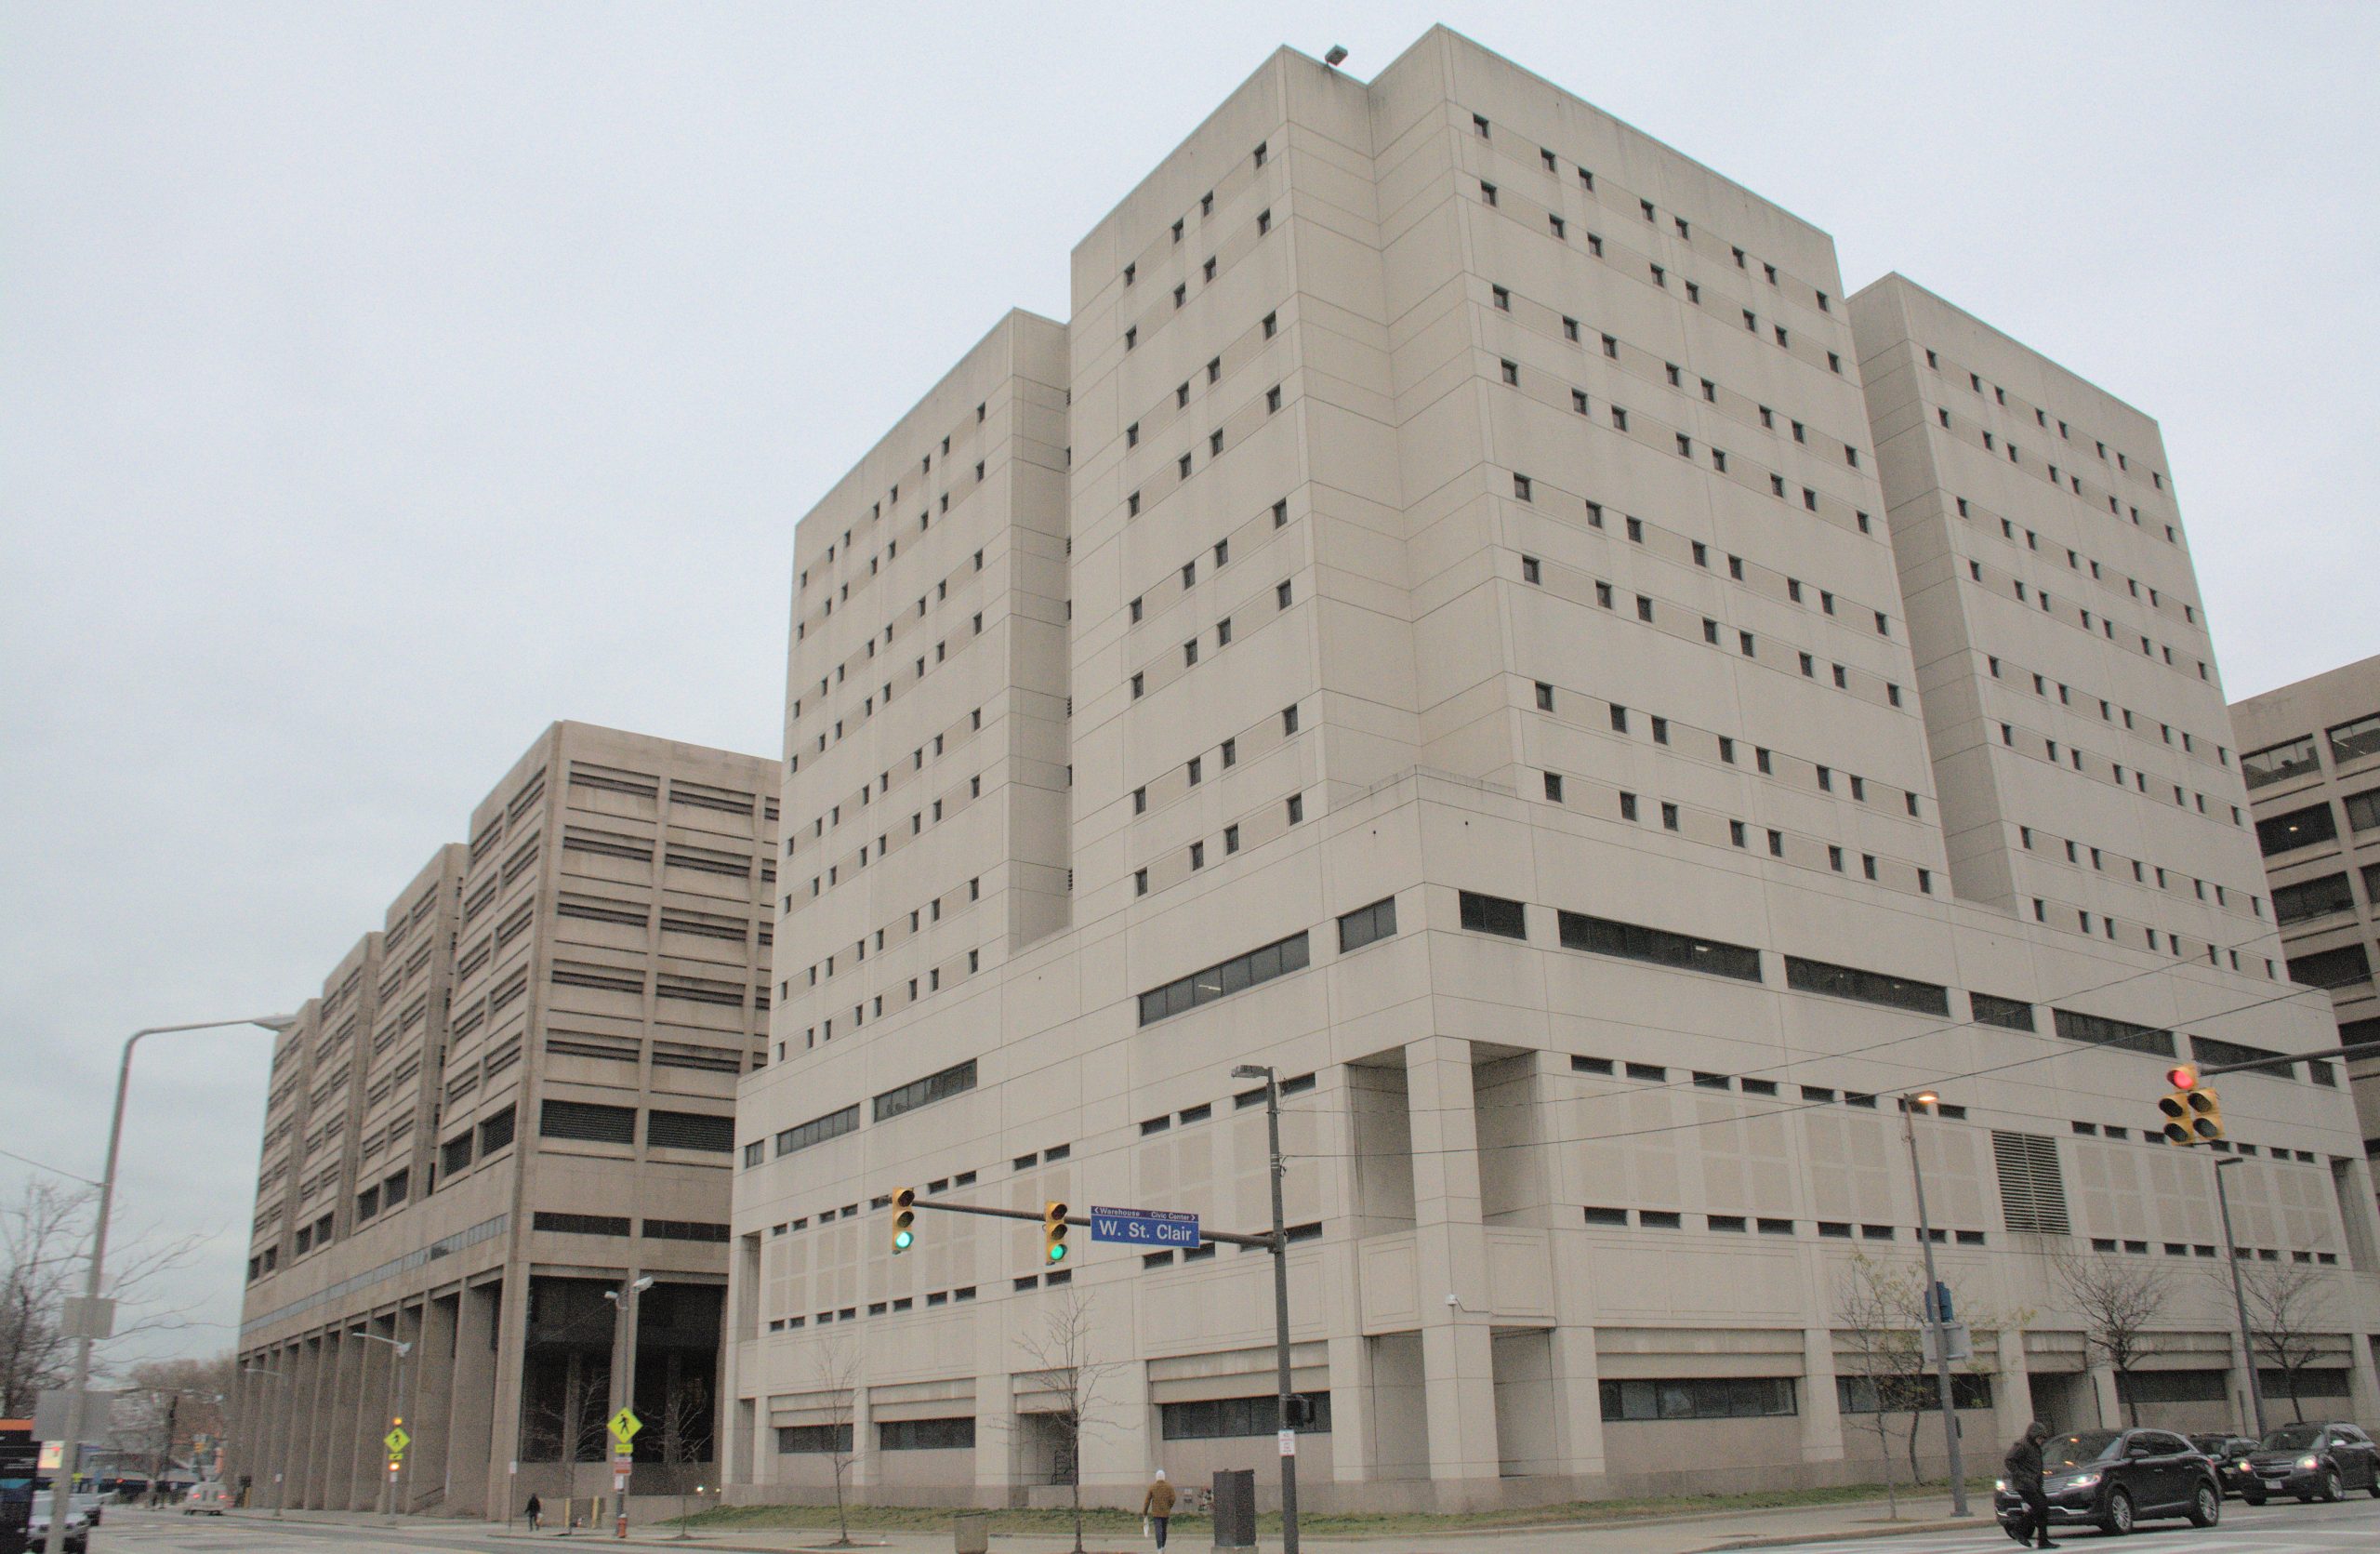 Cuyahoga County has no plans to bring back in-person visits for friends and family at the jail